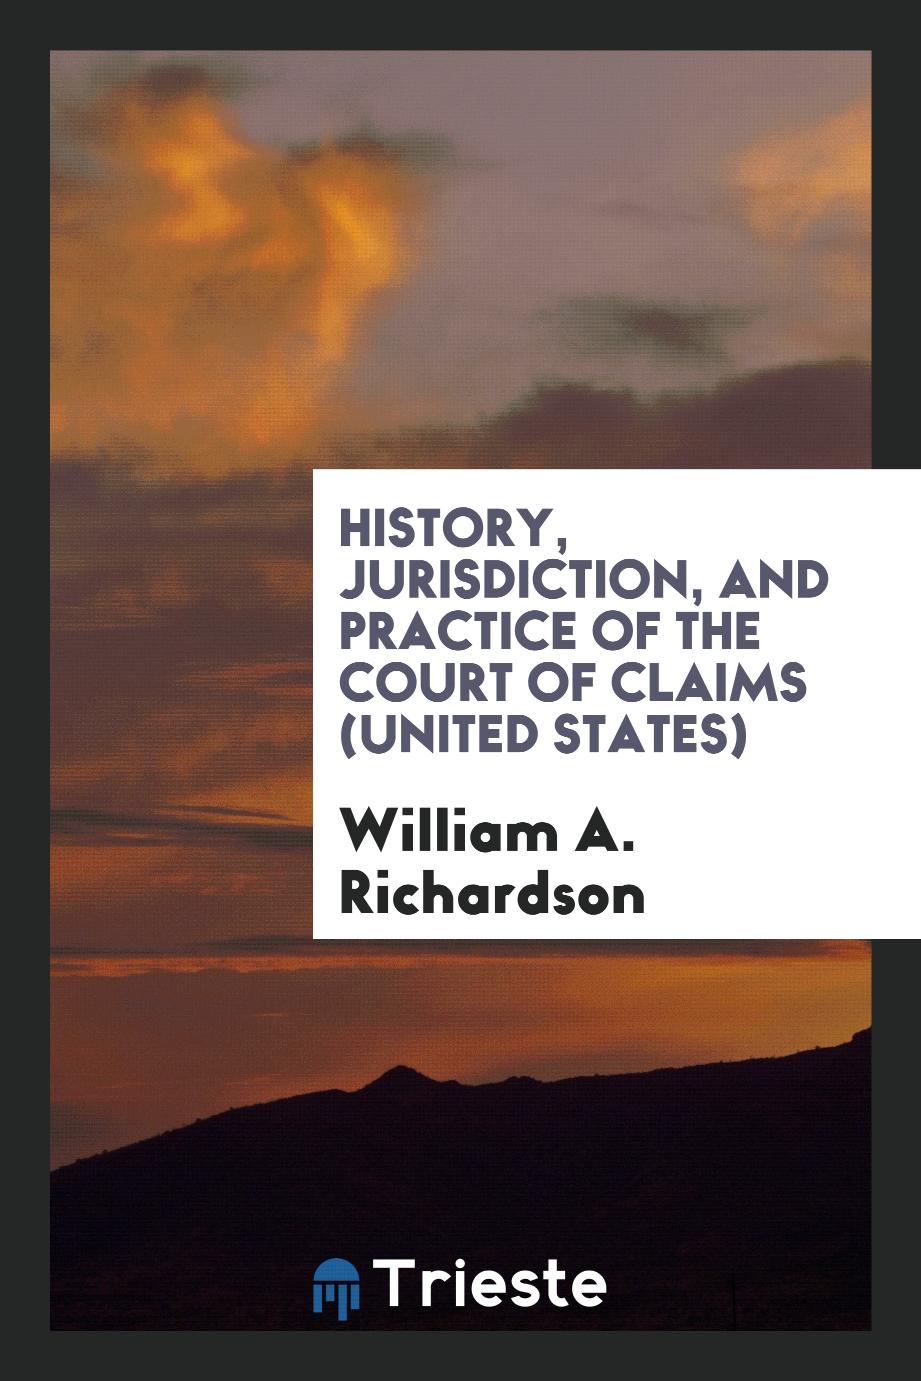 History, Jurisdiction, and Practice of the Court of Claims (United States)